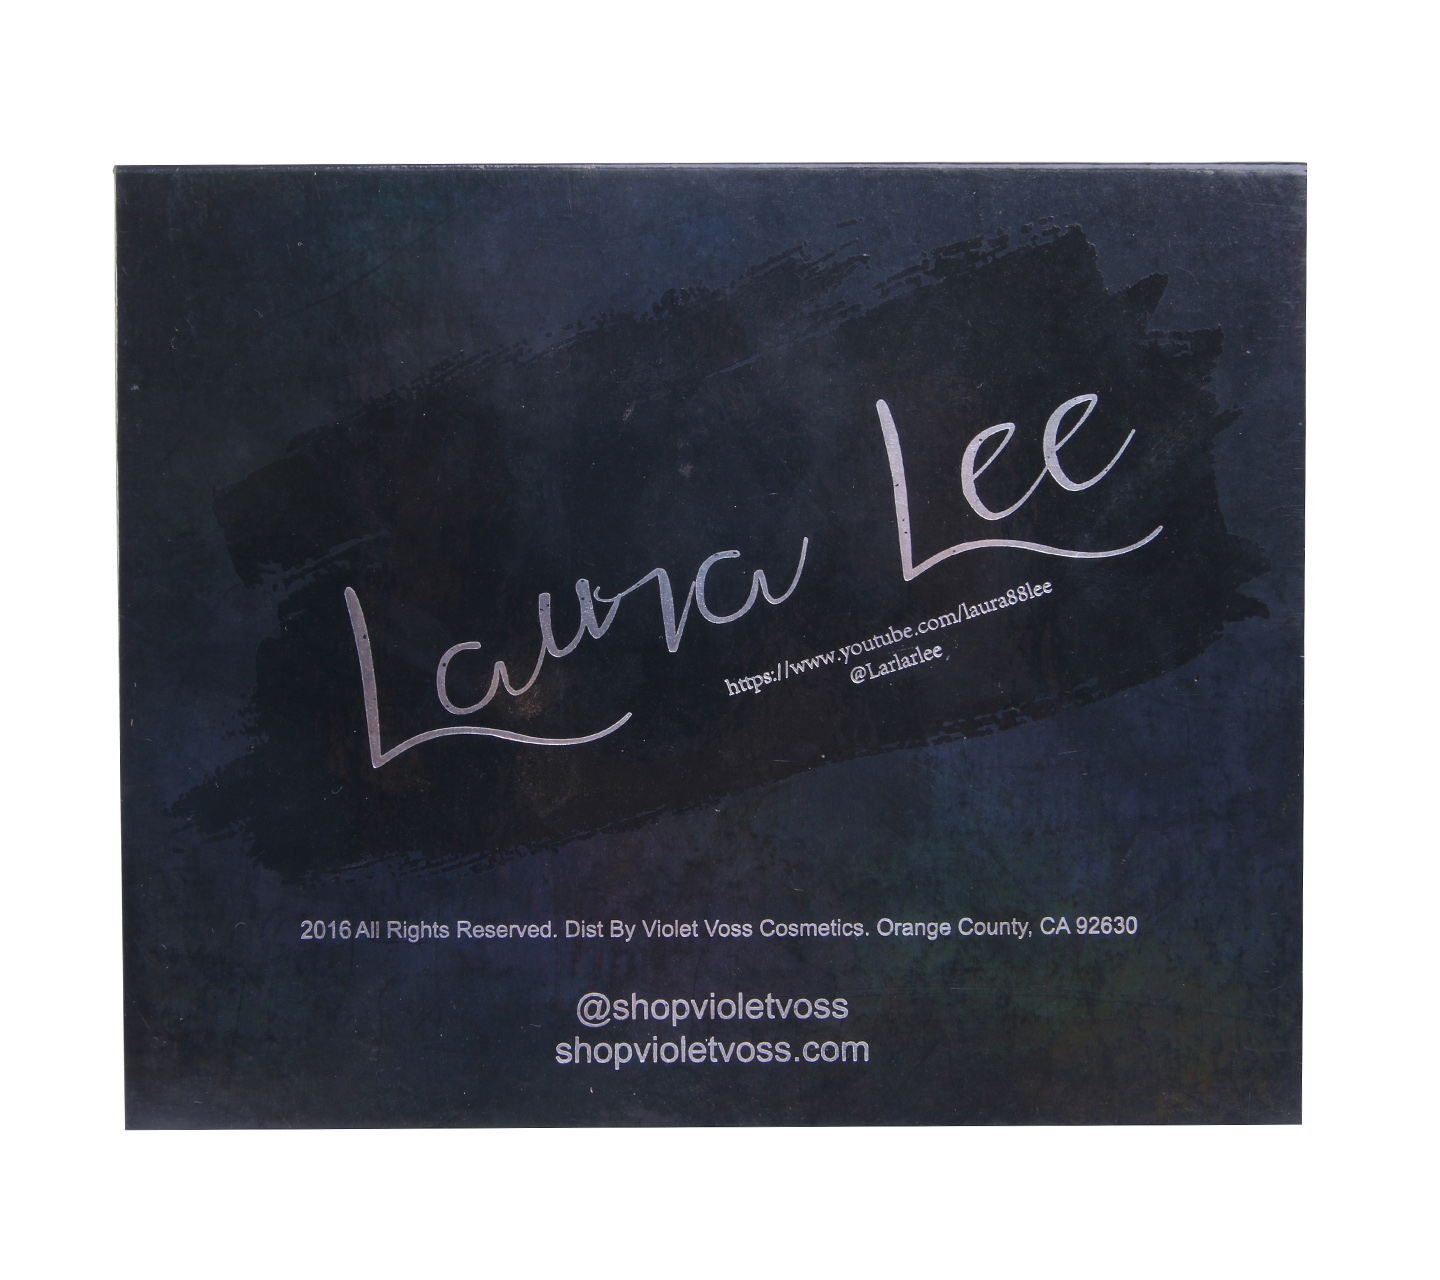 Violet Voss Laura Lee Pro Eyeshadow Sets and Palette